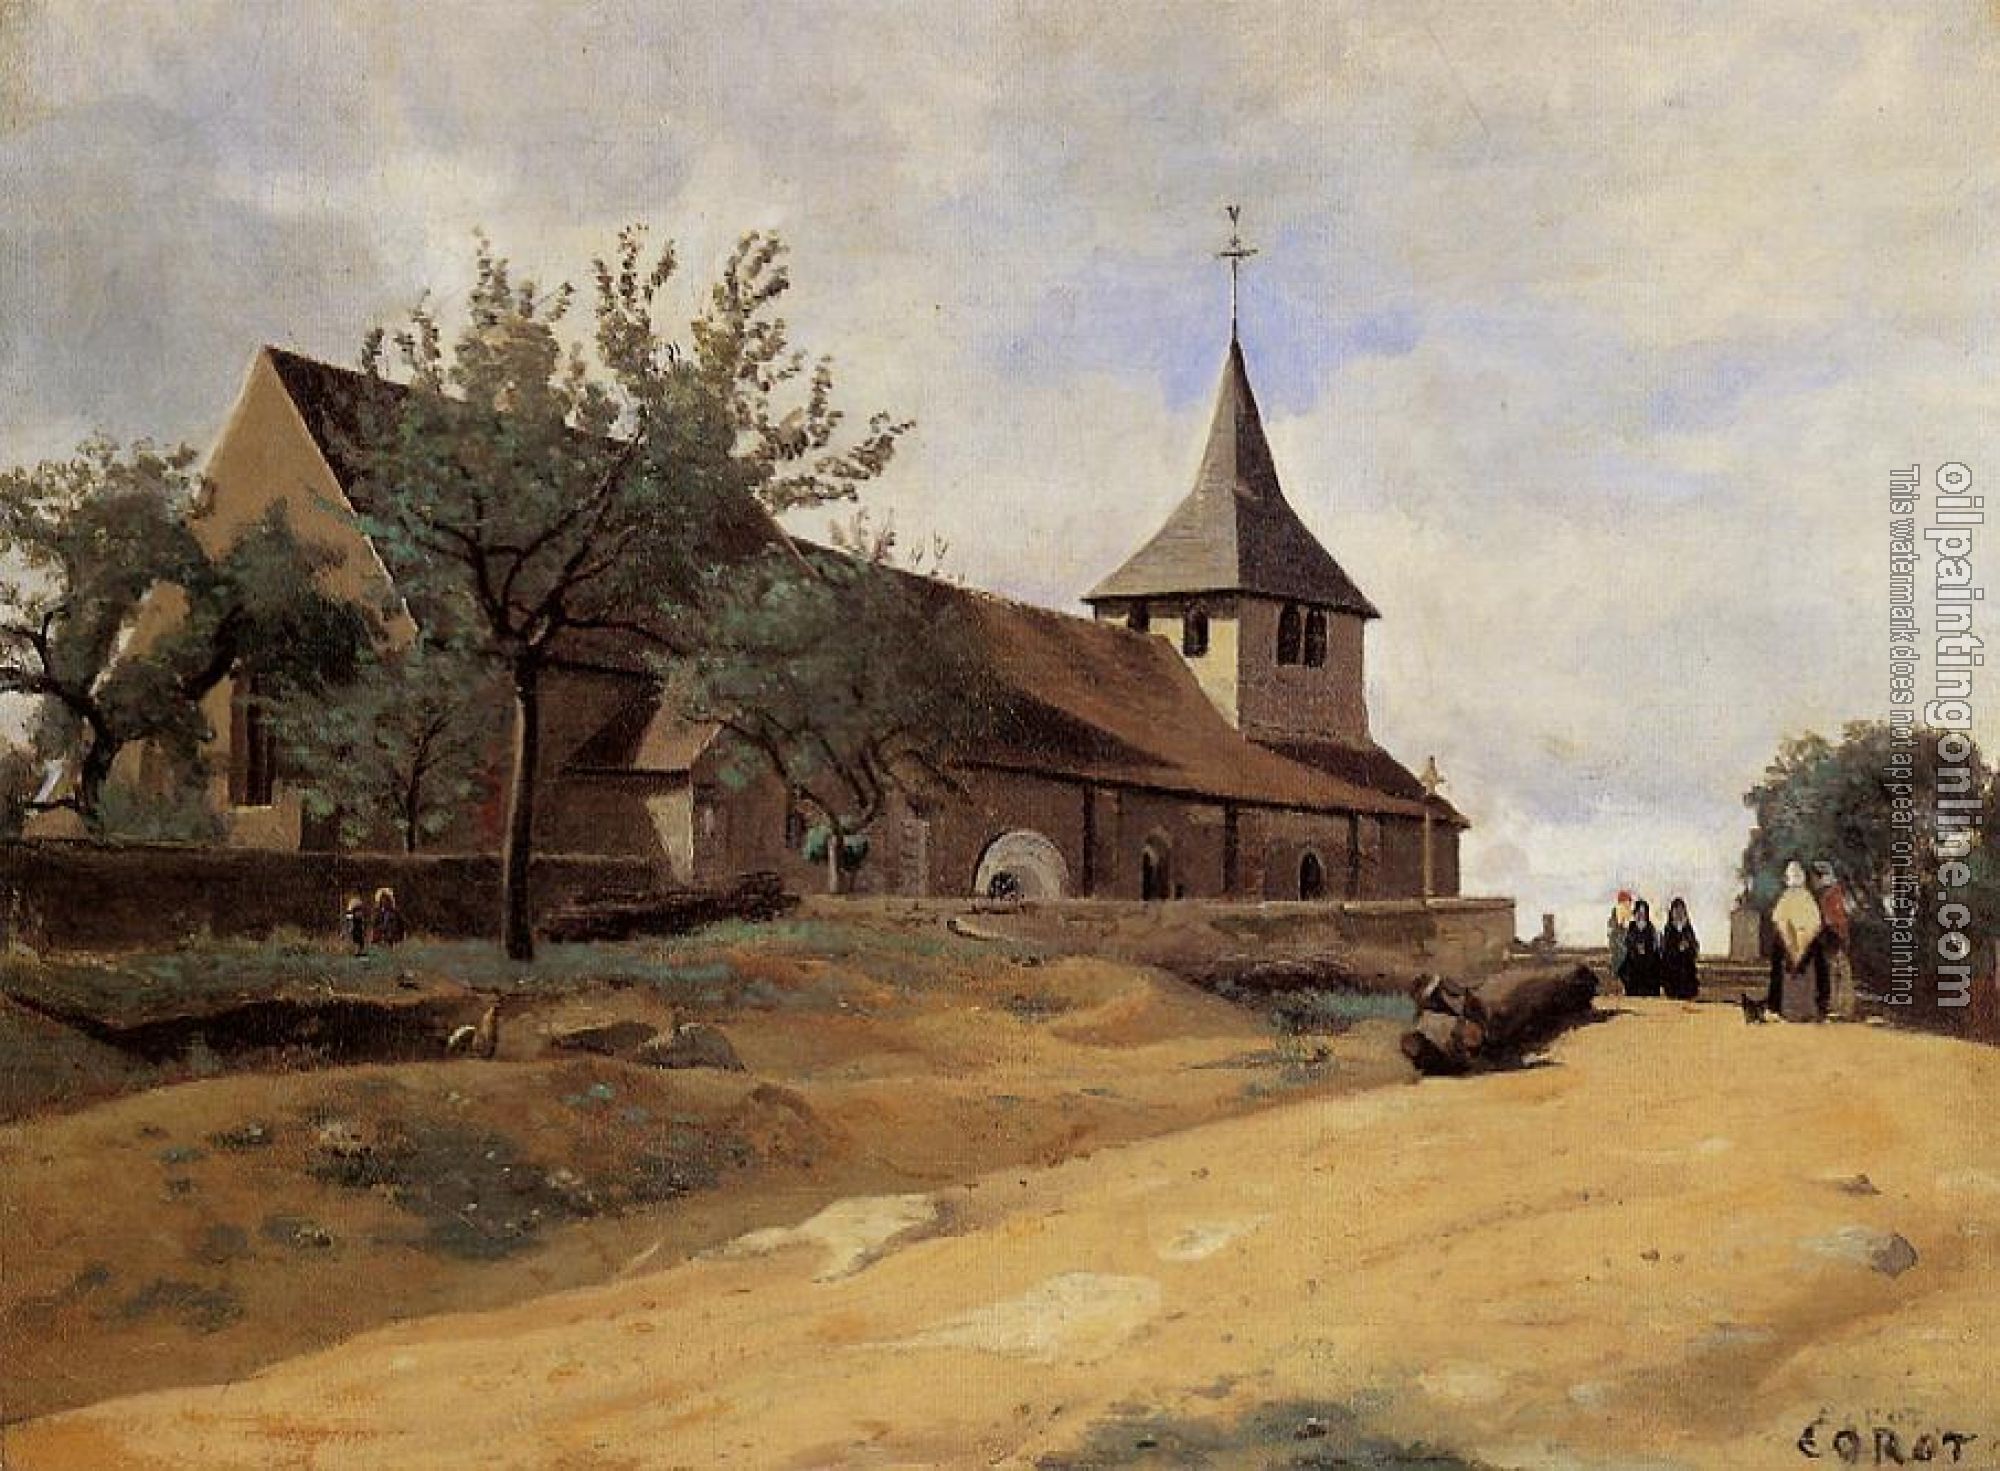 Corot, Jean-Baptiste-Camille - The Church at Lormes